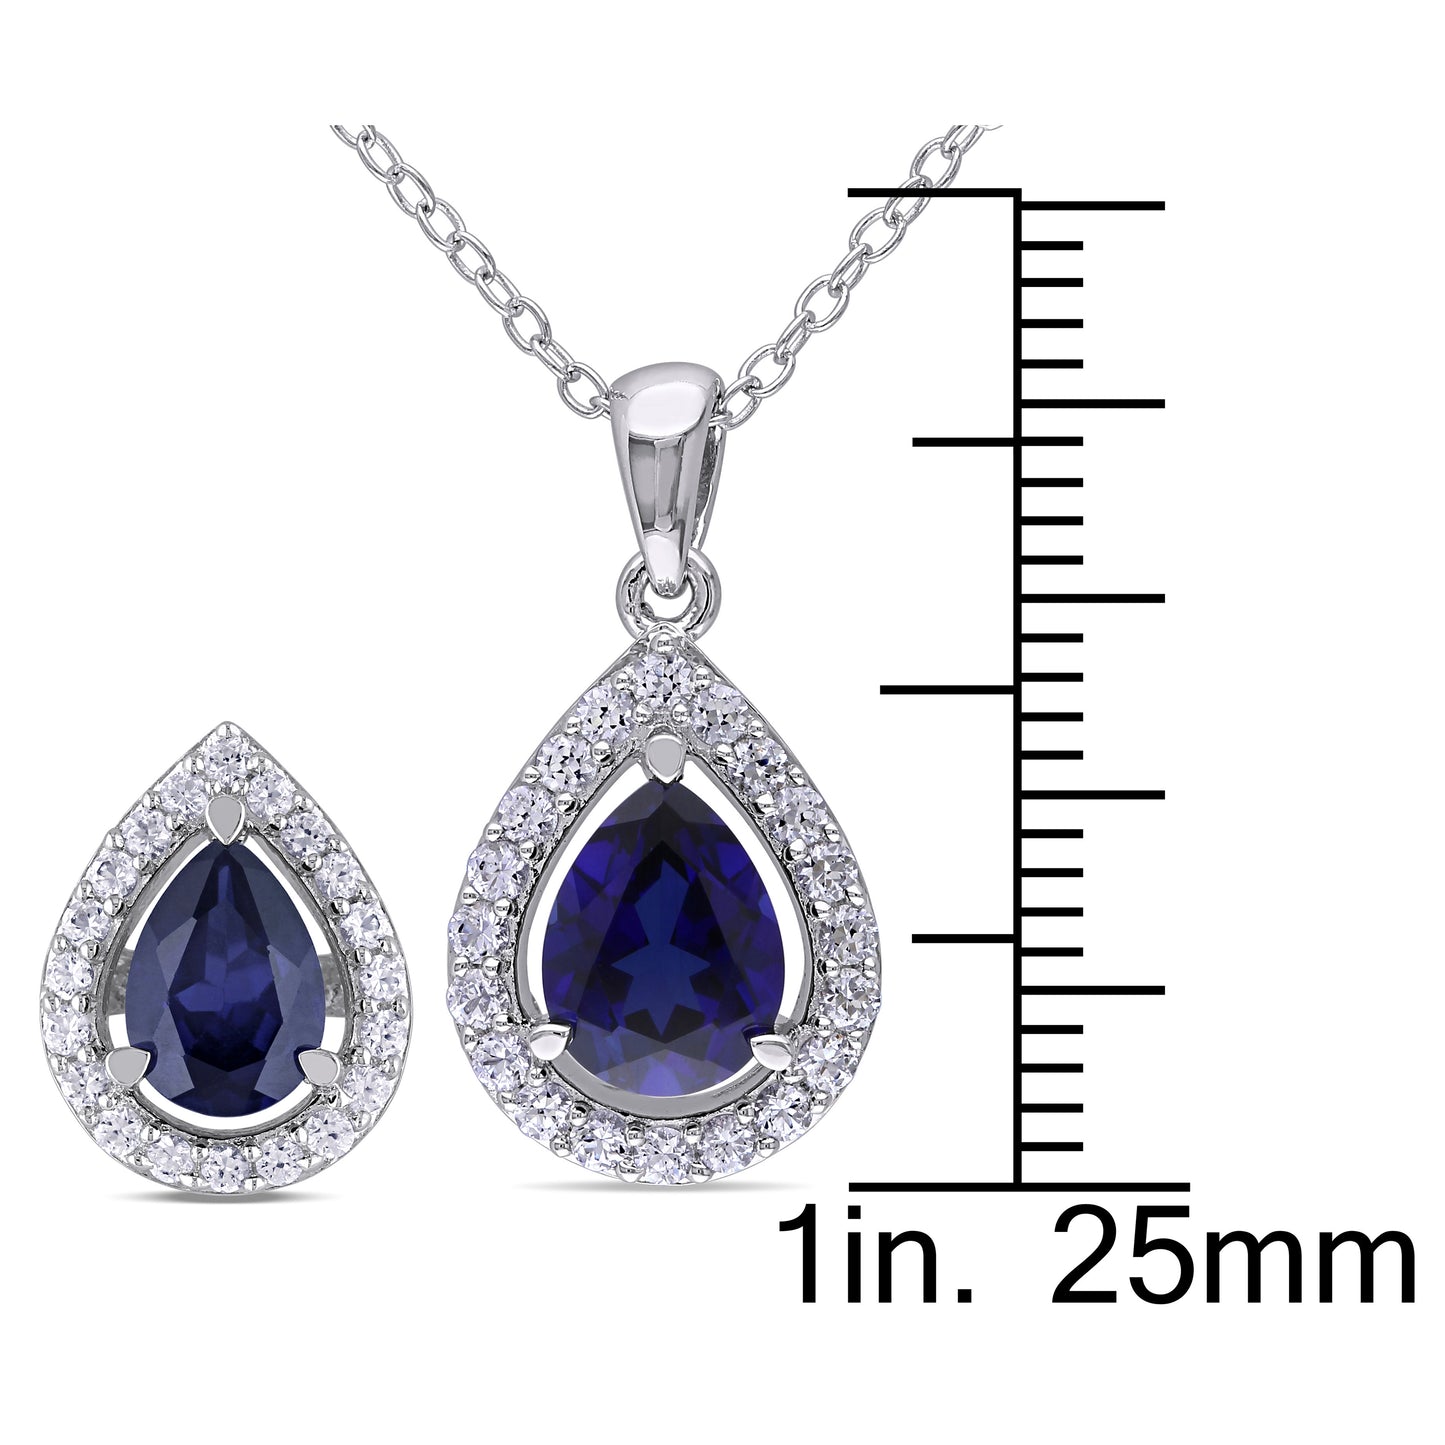 3 Piece White & Blue Sapphire Set in Sterling Silver